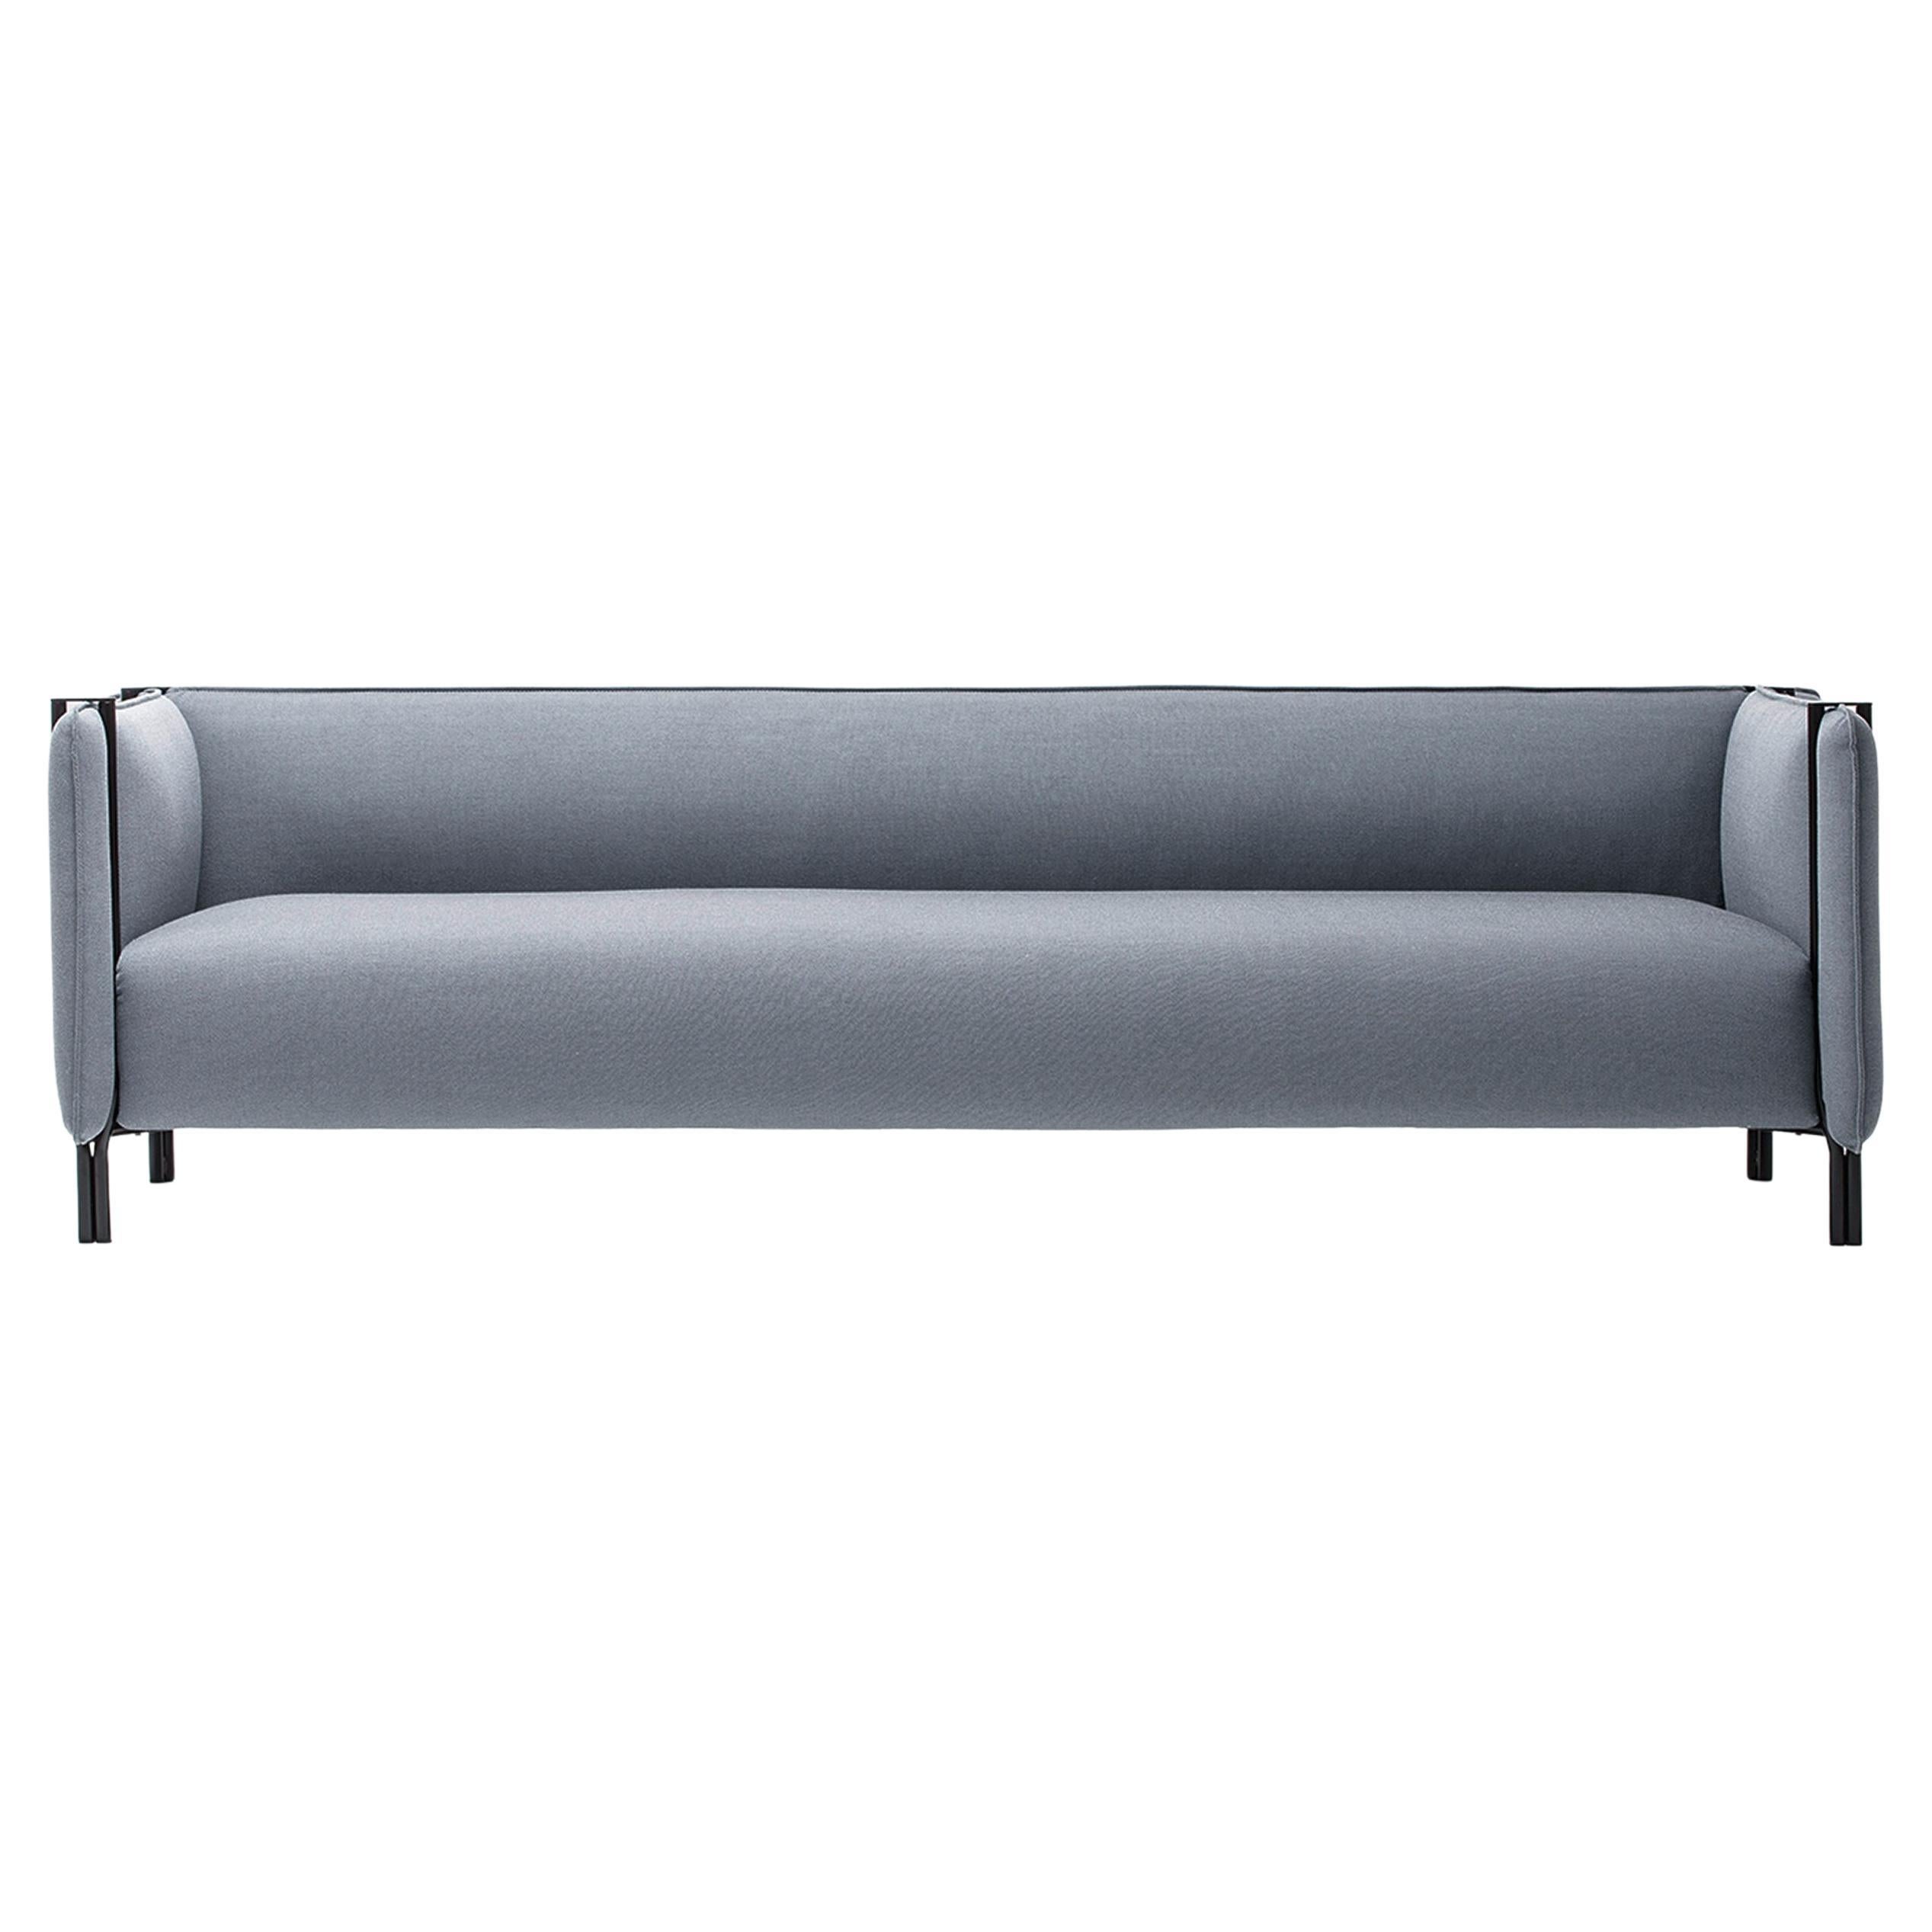 Pinch 3 Seater Sofa Major in Comfort Upholstery with Black Base by Skrivo Design For Sale